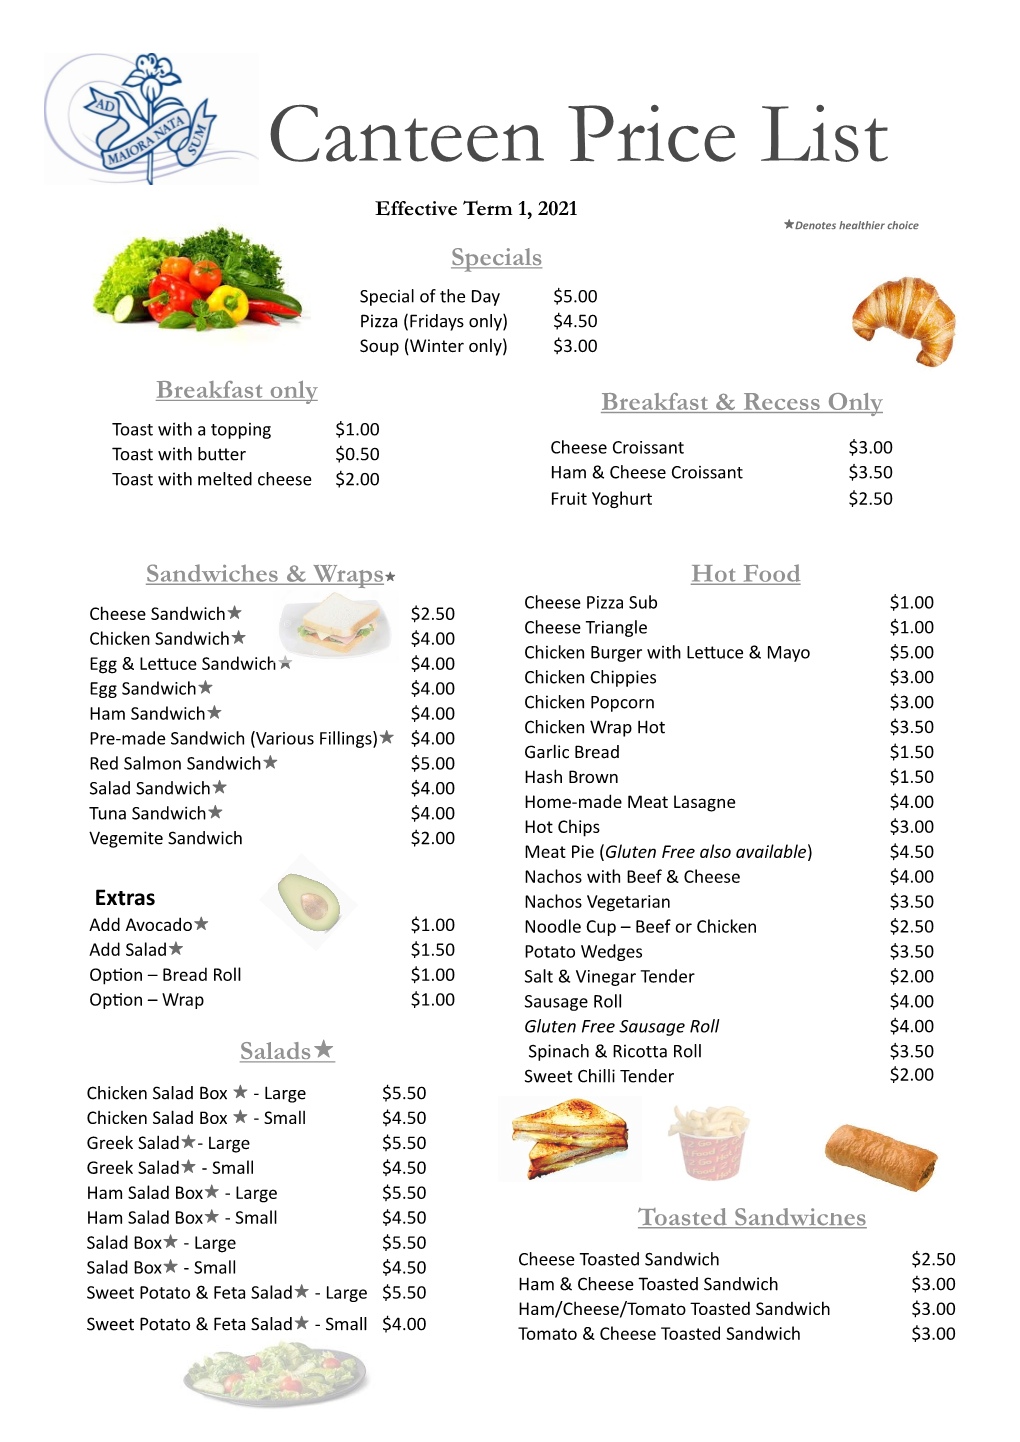 Breakfast & Recess Only Breakfast Only Sandwiches & Wraps Toasted Sandwiches Specials Salads Hot Food